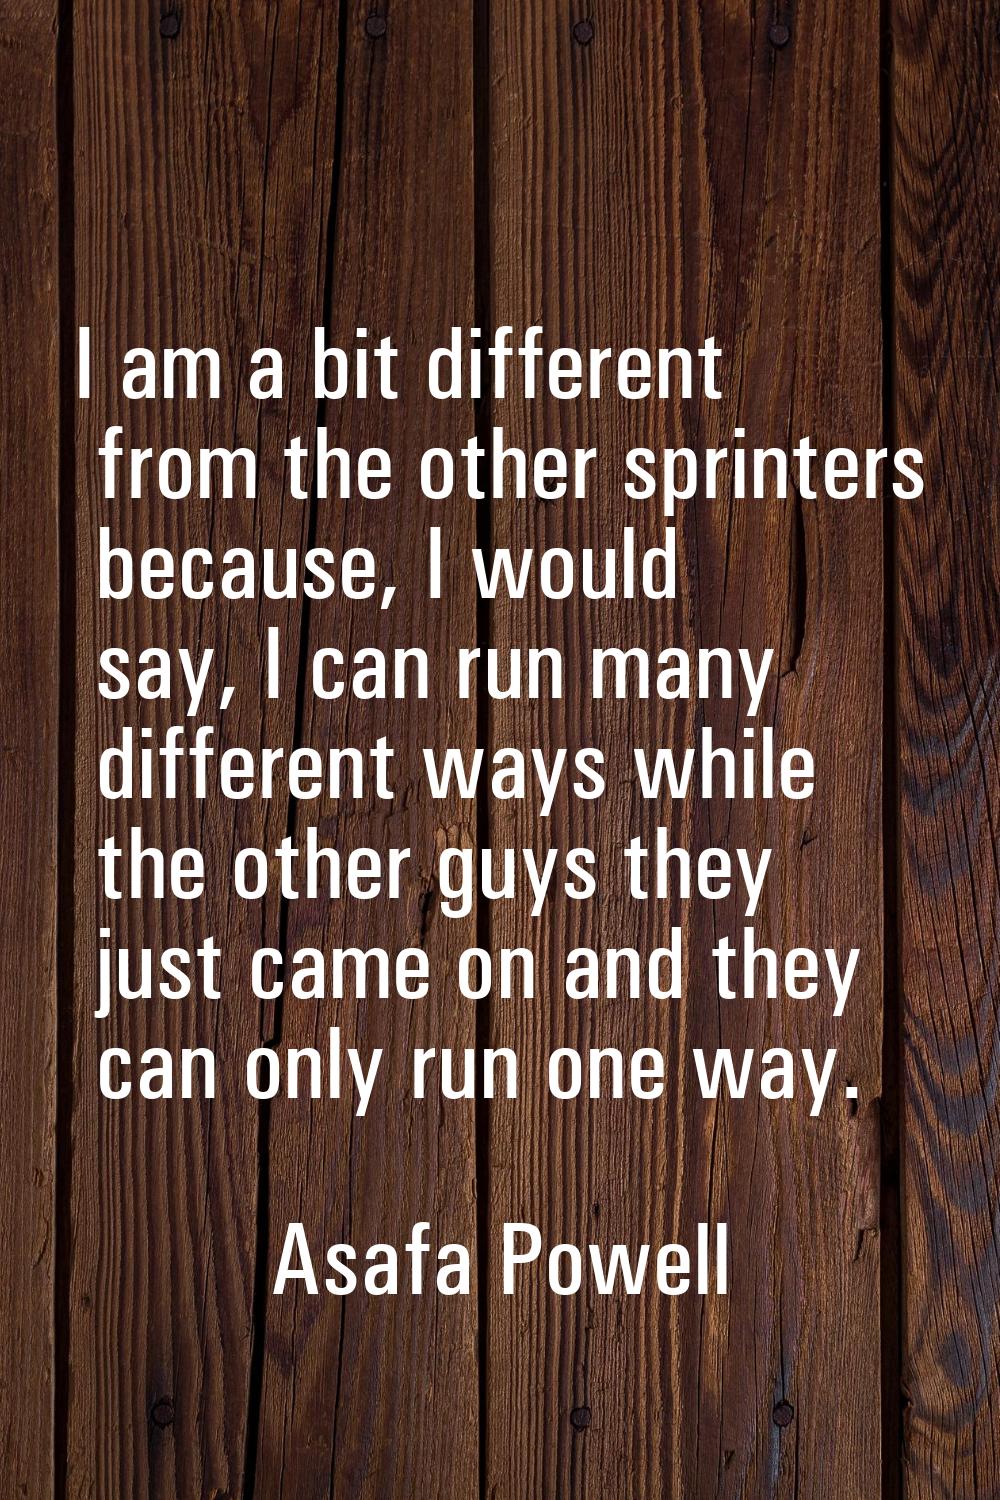 I am a bit different from the other sprinters because, I would say, I can run many different ways w